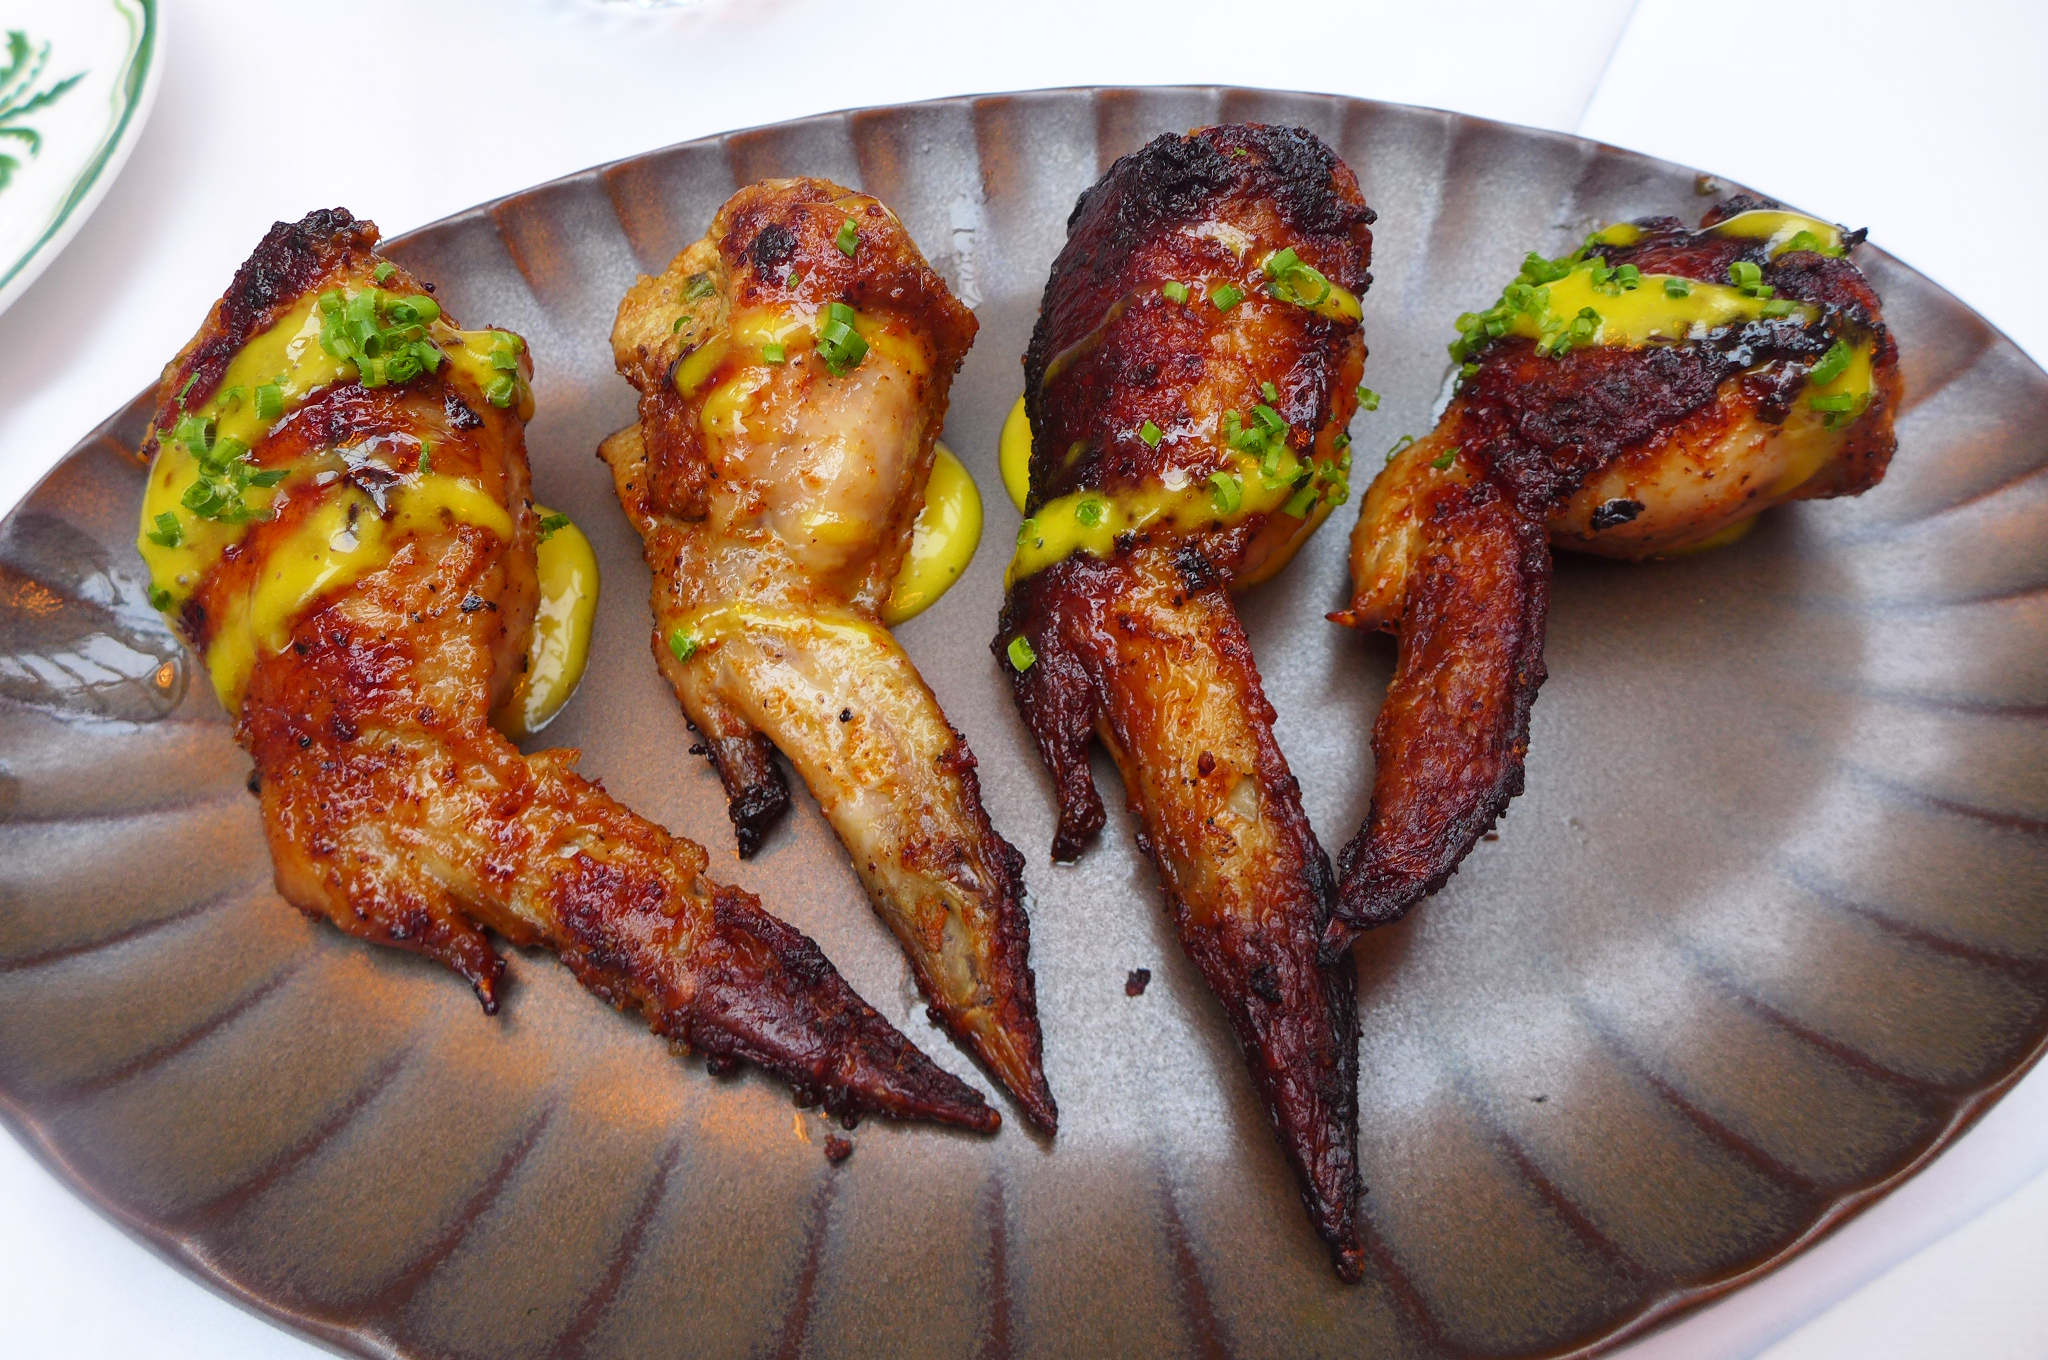 Four wings coated with spices on a metallic gray plate with ripples.